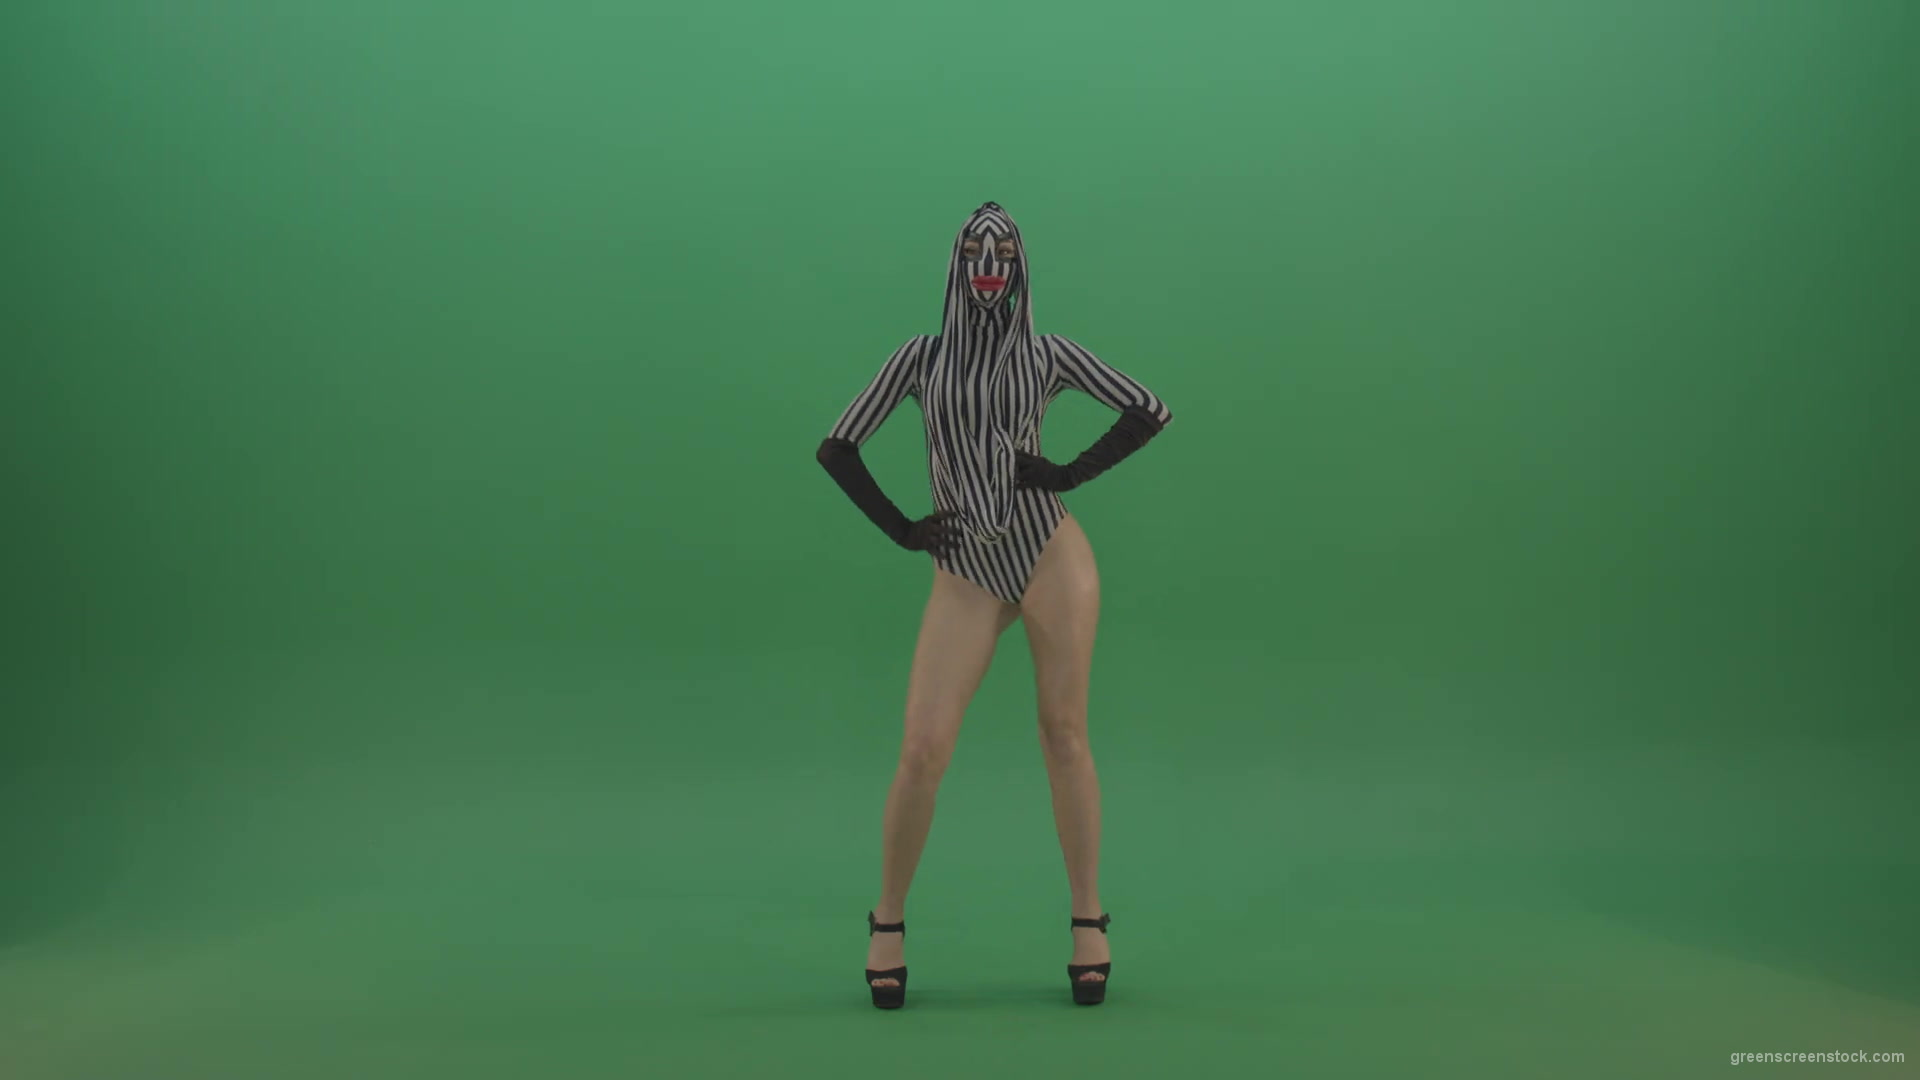 Ass-shake-beats-by-edm-go-go-girl-dance-isolated-on-green-screen-1920_008 Green Screen Stock